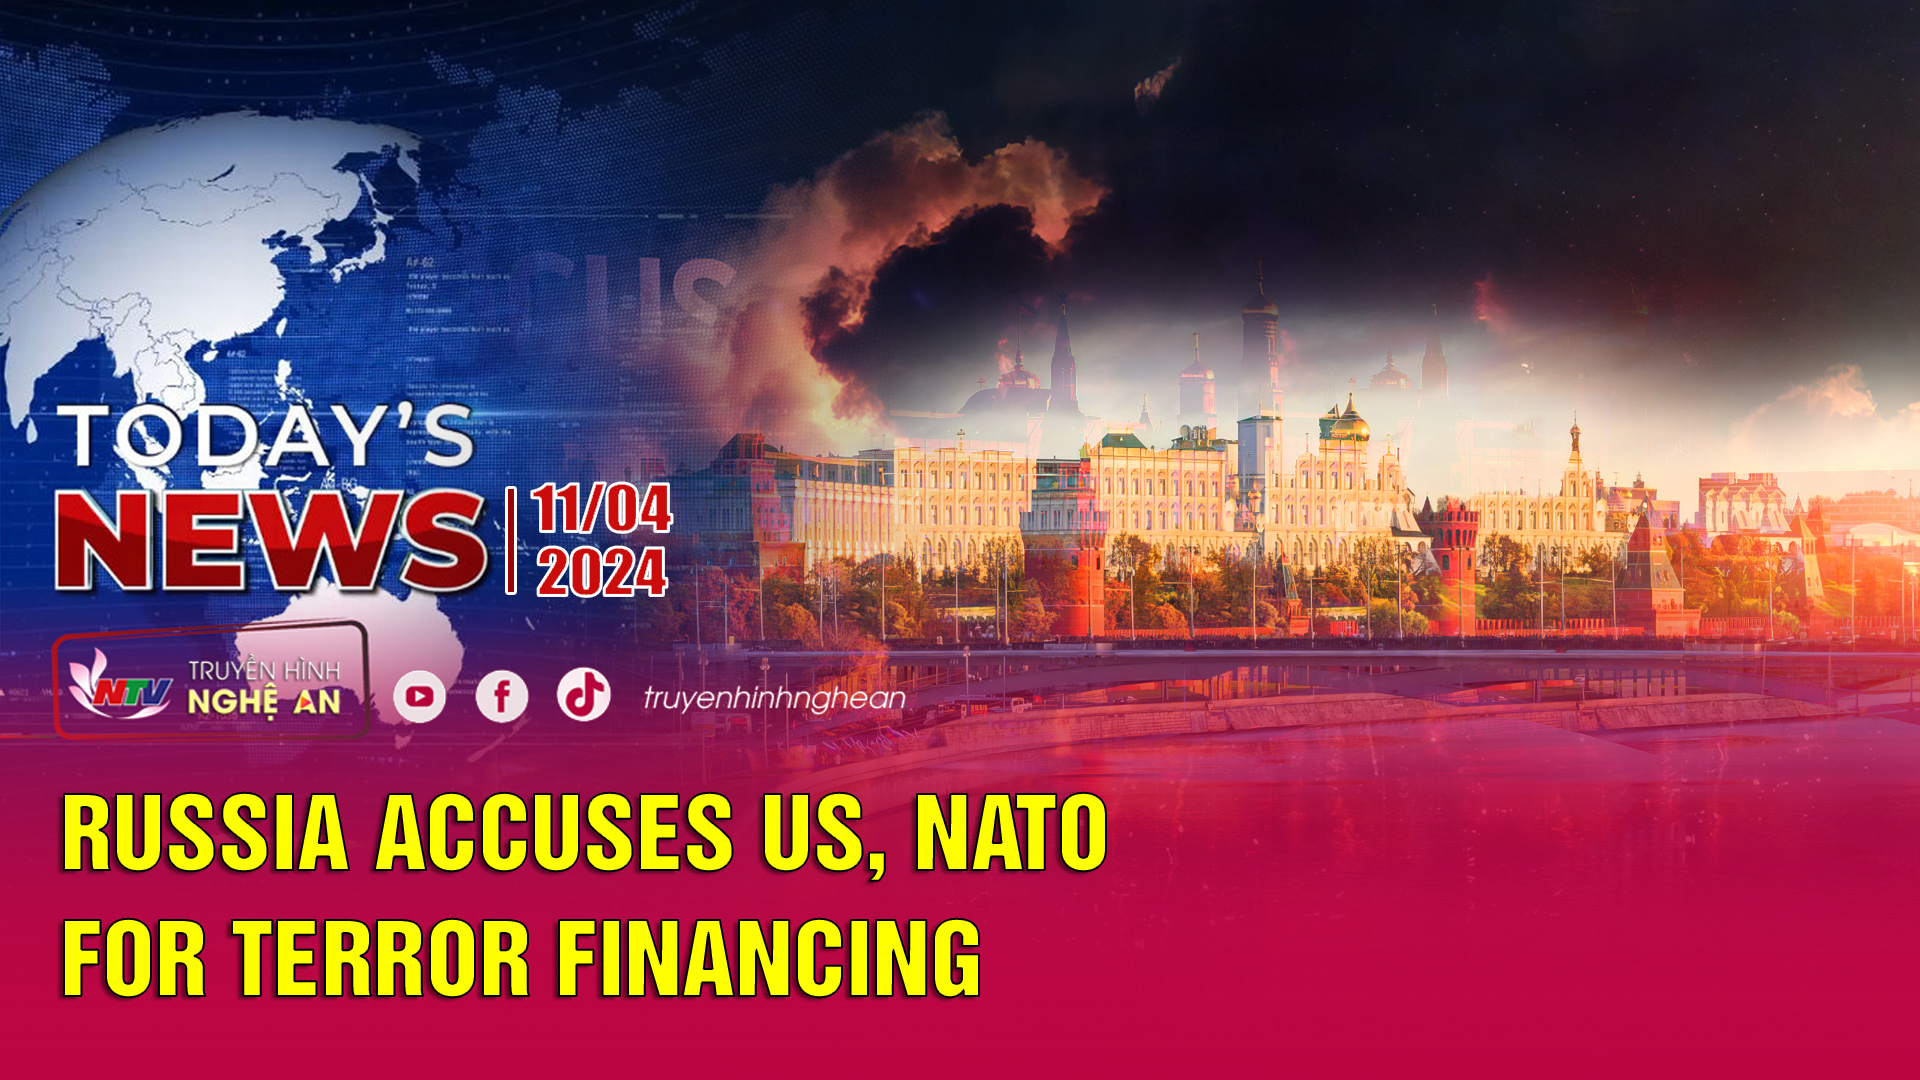 Today's News 11/4/2024: Russia accuses US, NATO for terror financing